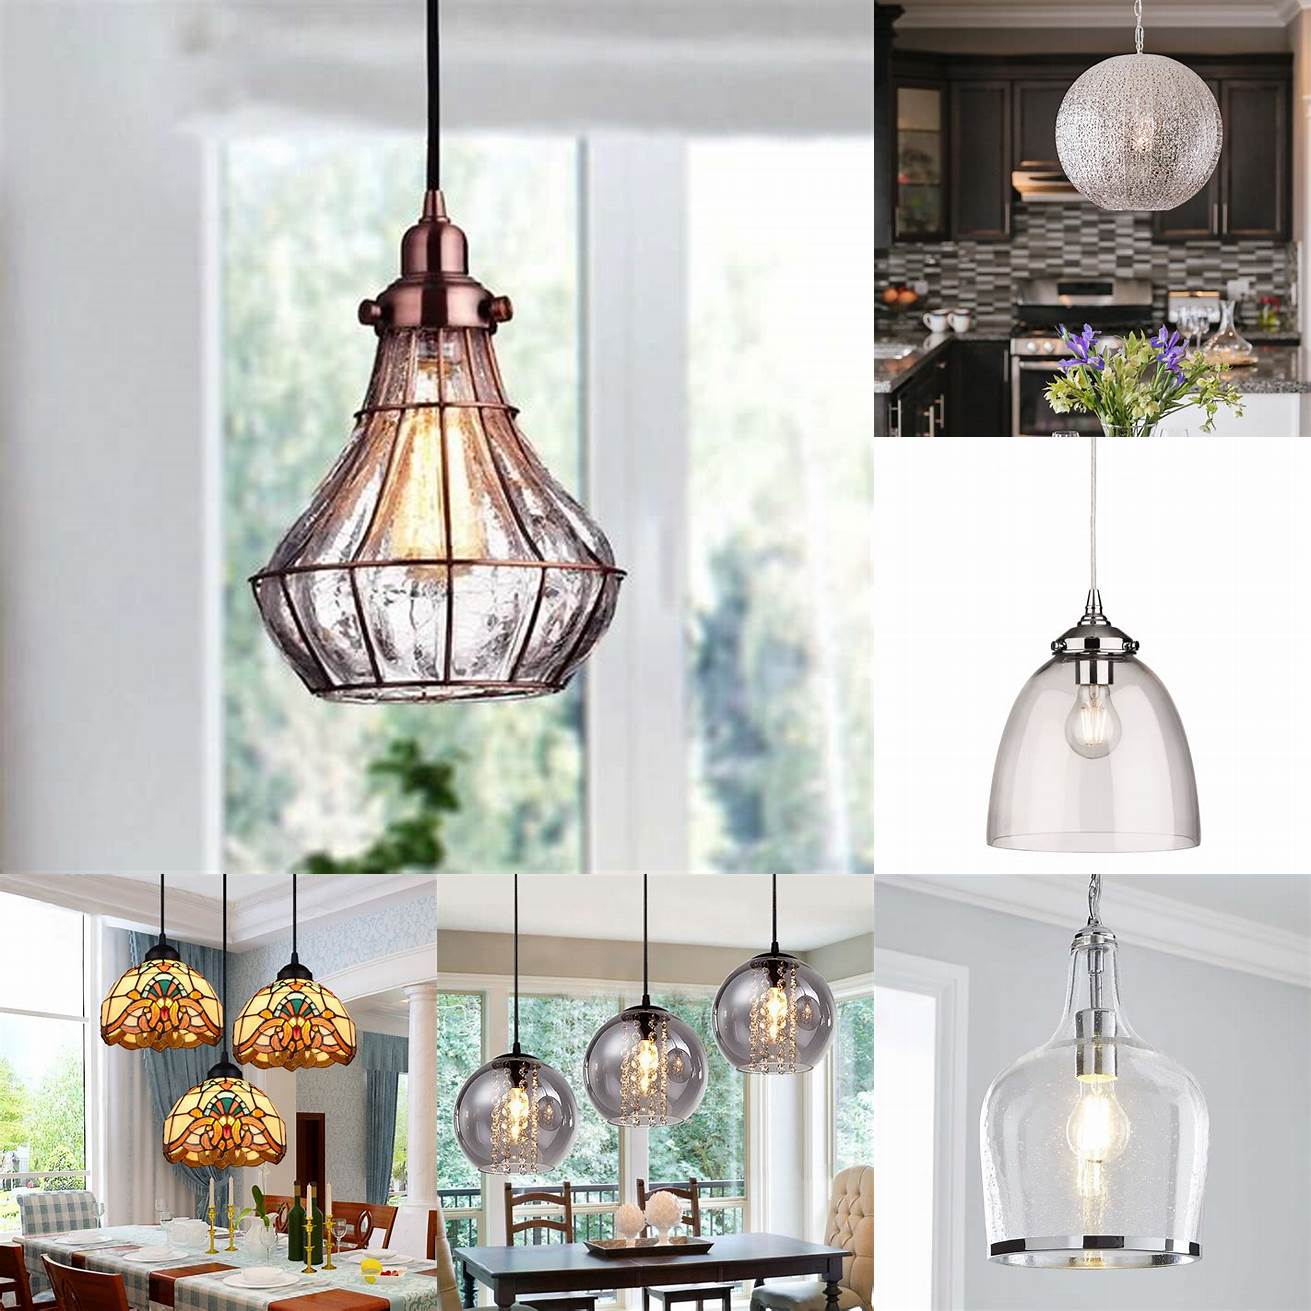 These glass pendant lights add a touch of elegance and sophistication to any dining room